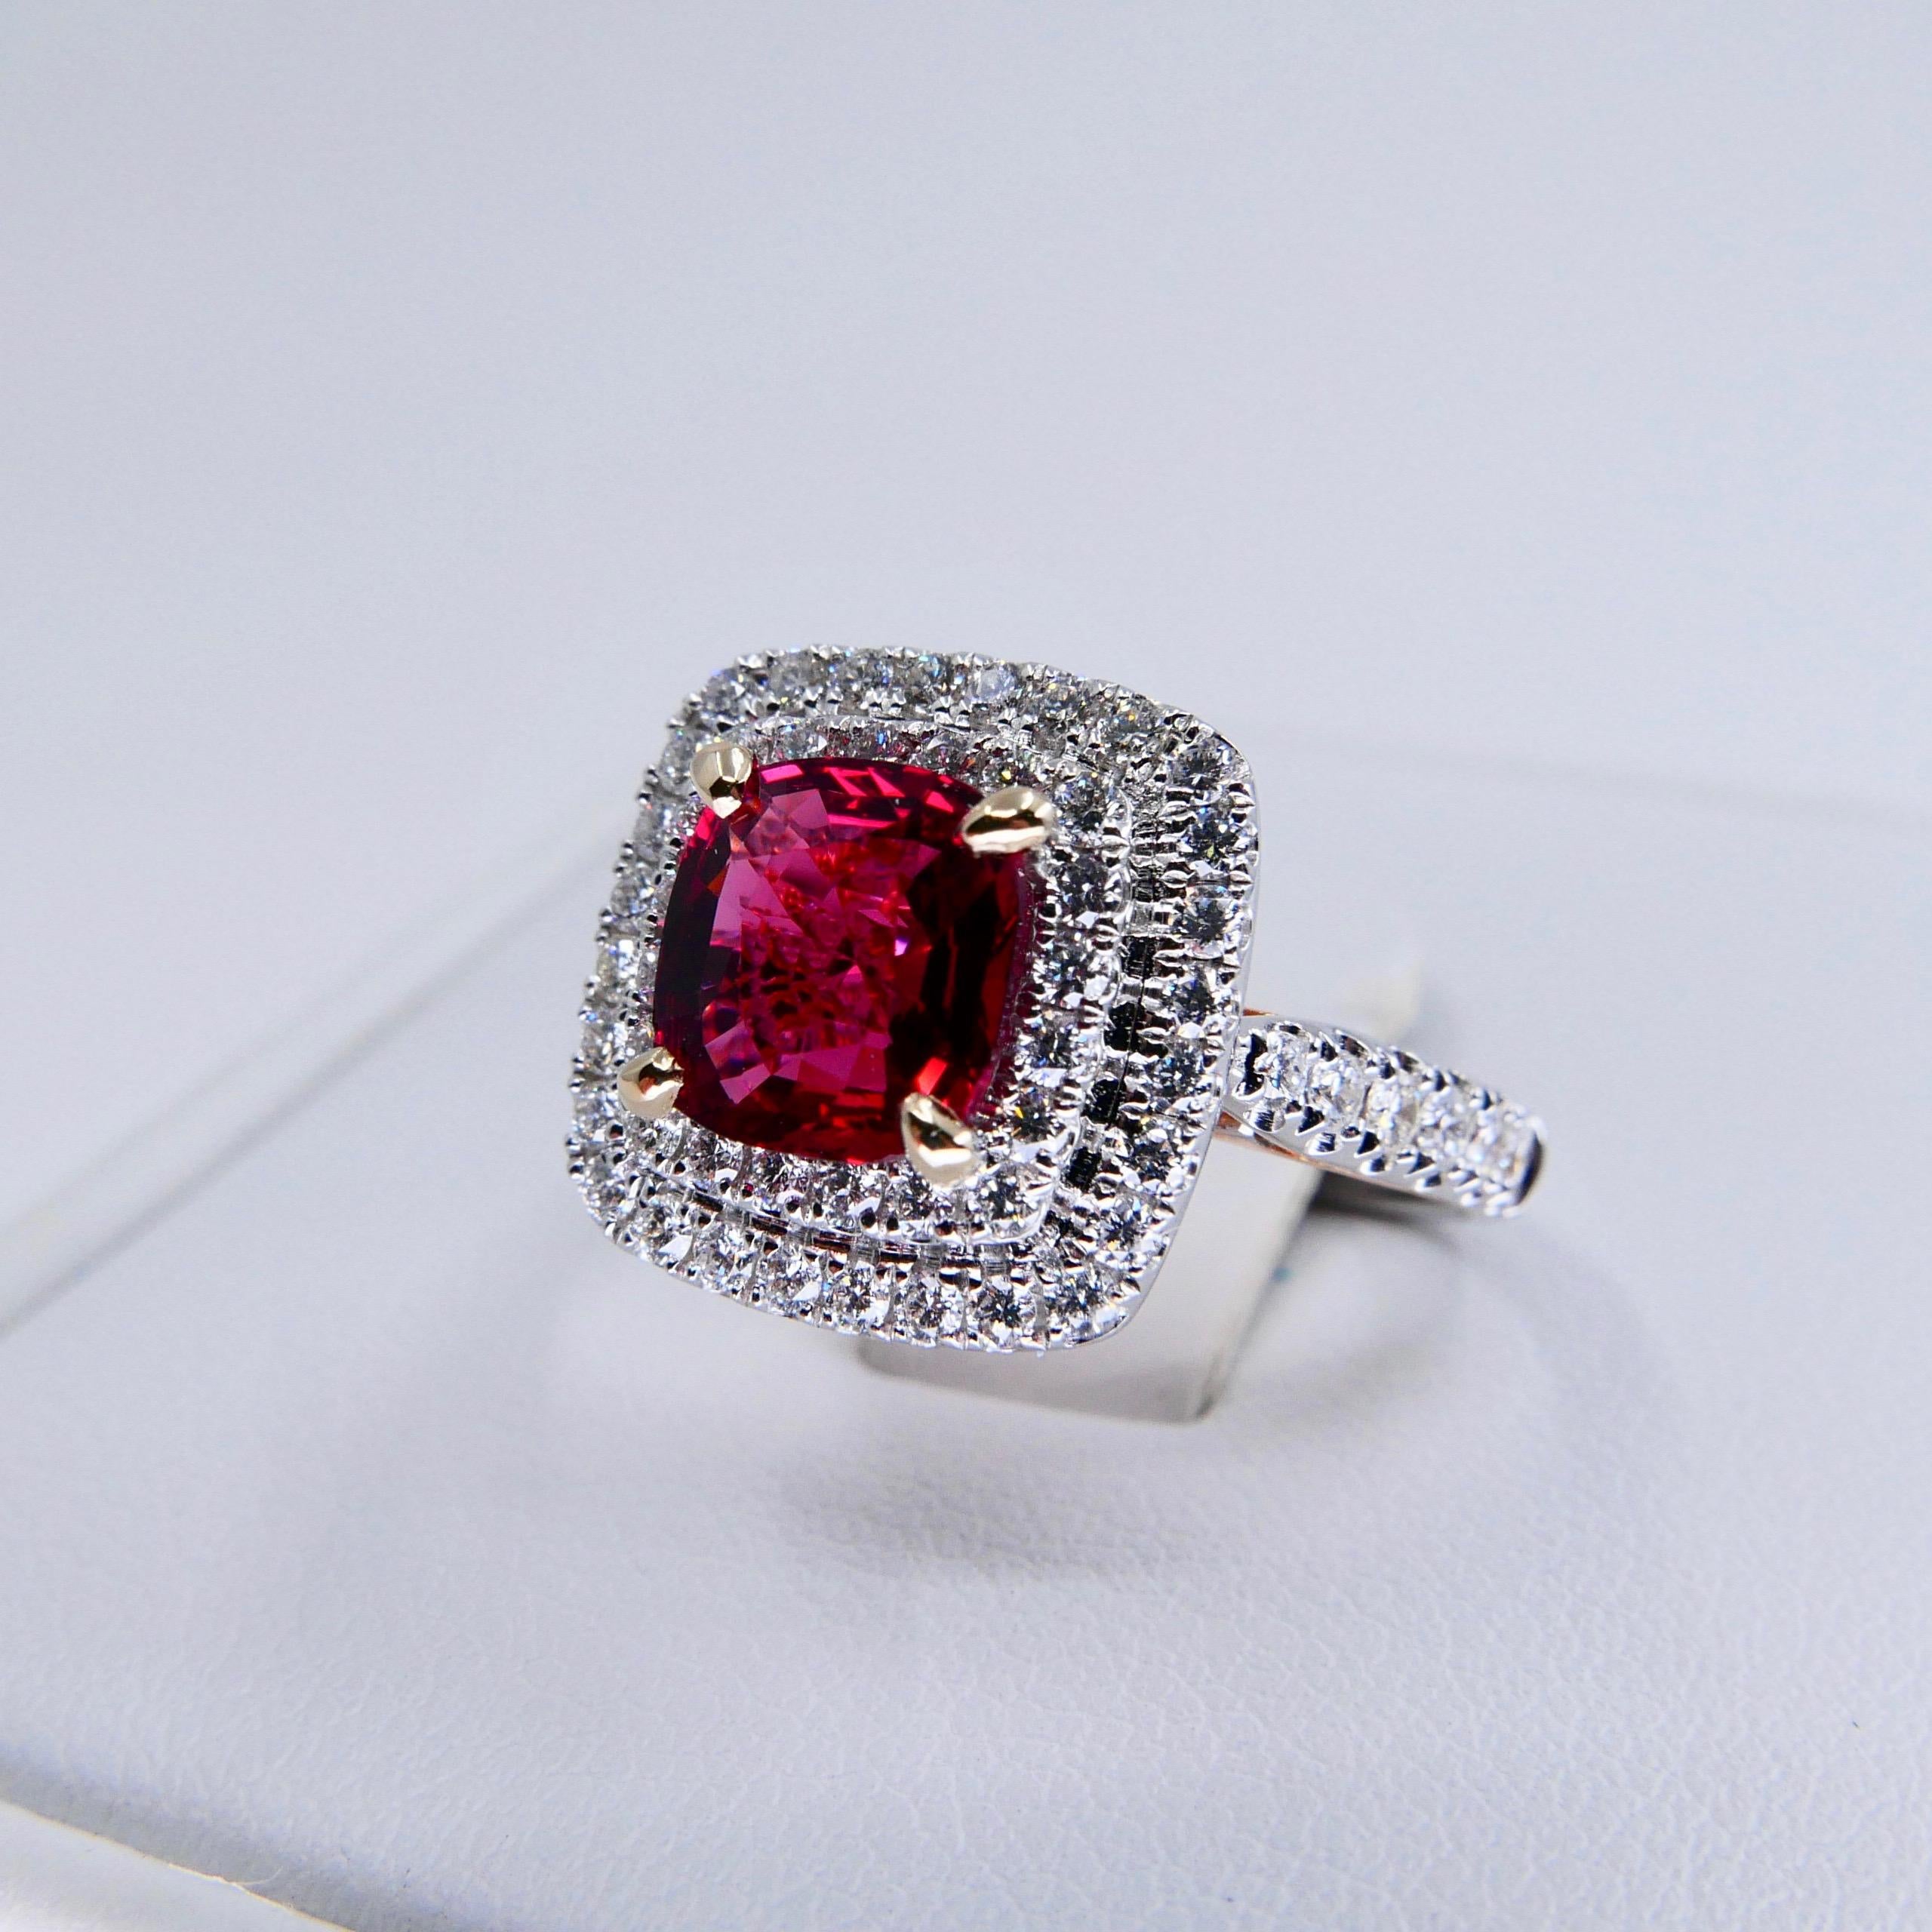 Cushion Cut Natural Red Spinel 1.51 Carat and Diamond Ring 18K Two-Tone White and Rose Gold